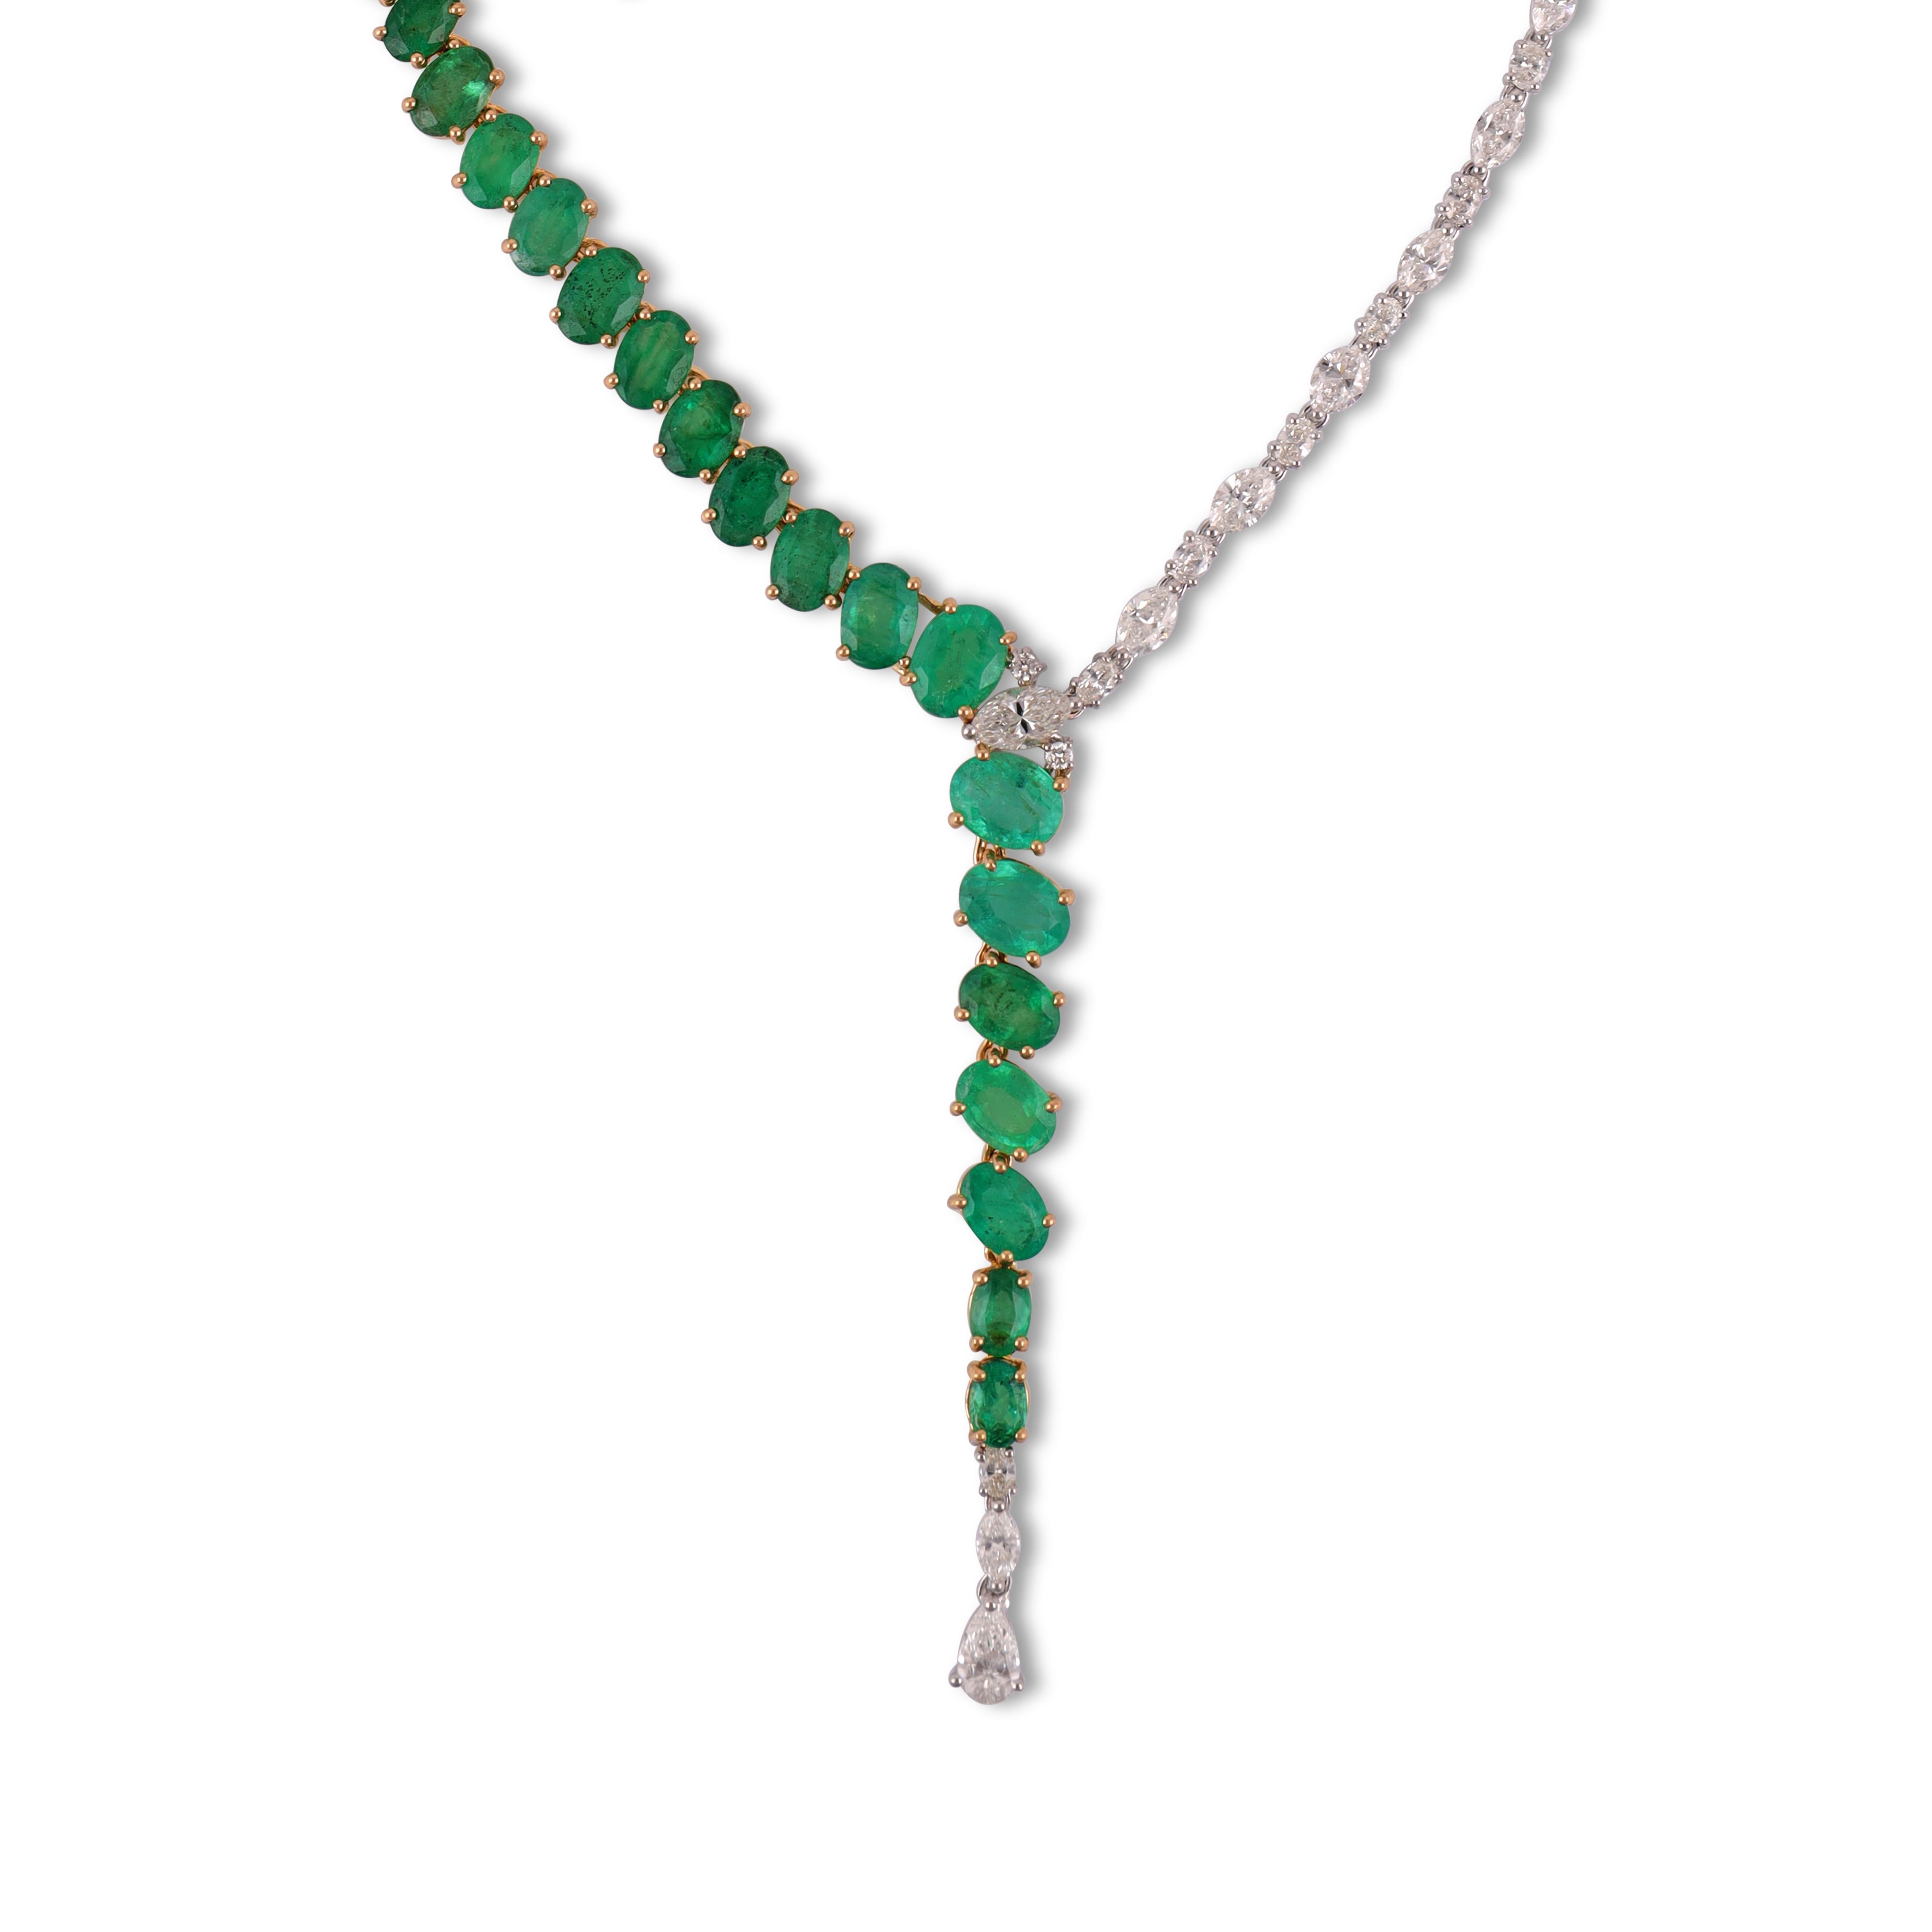 Contemporary Magnificent 26.73 Carat Emerald & Diamond Necklace with Earrings For Sale